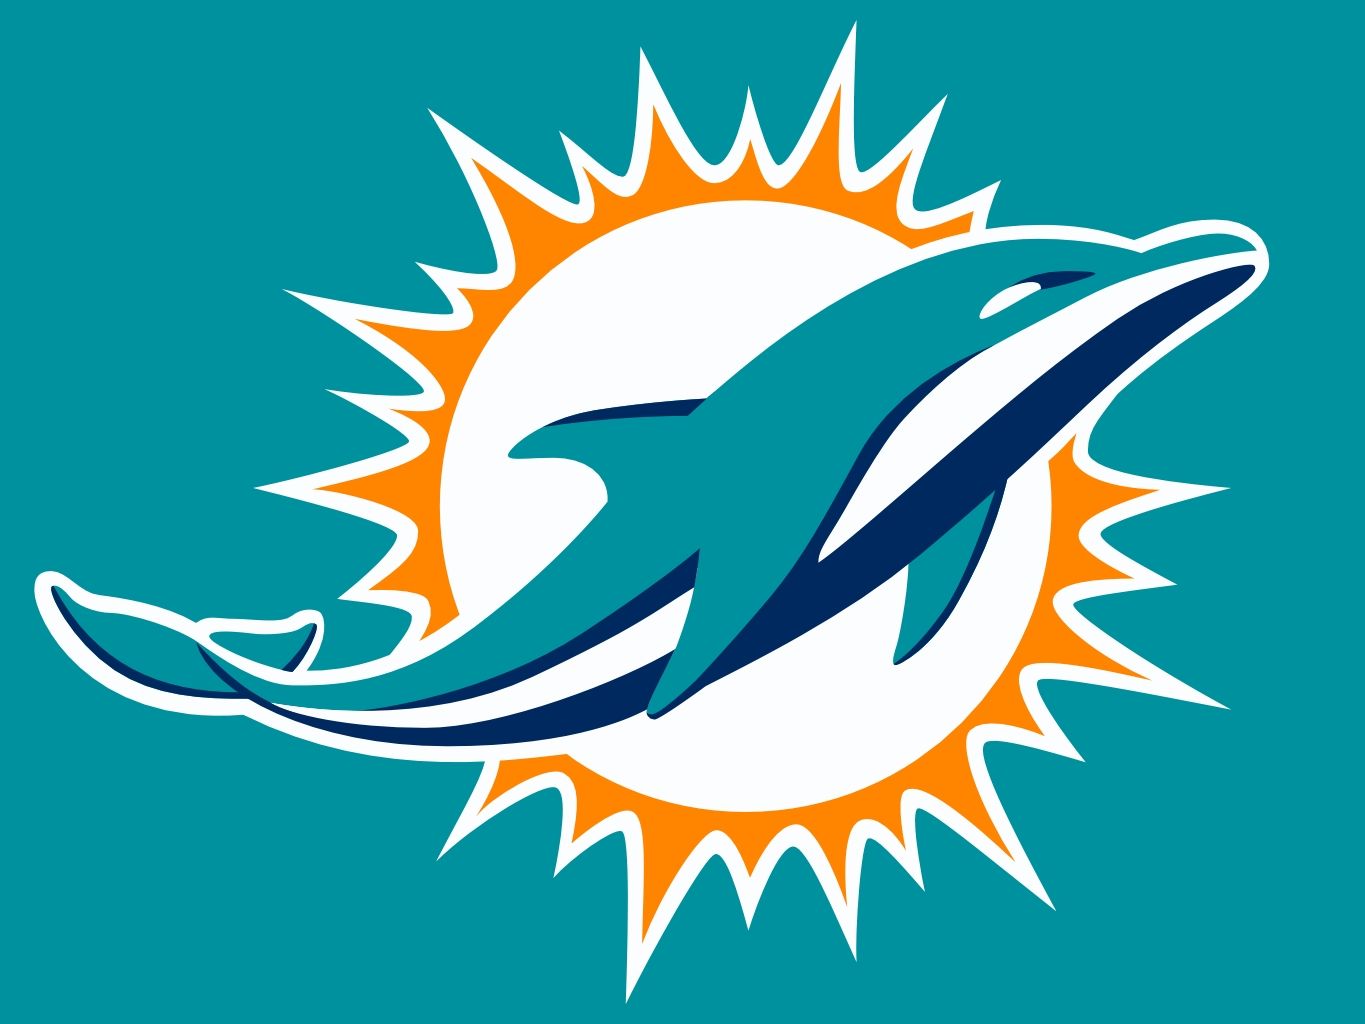 Miami Dolphins Image 5286 1365x1024 px ~ WallpaperFort.com